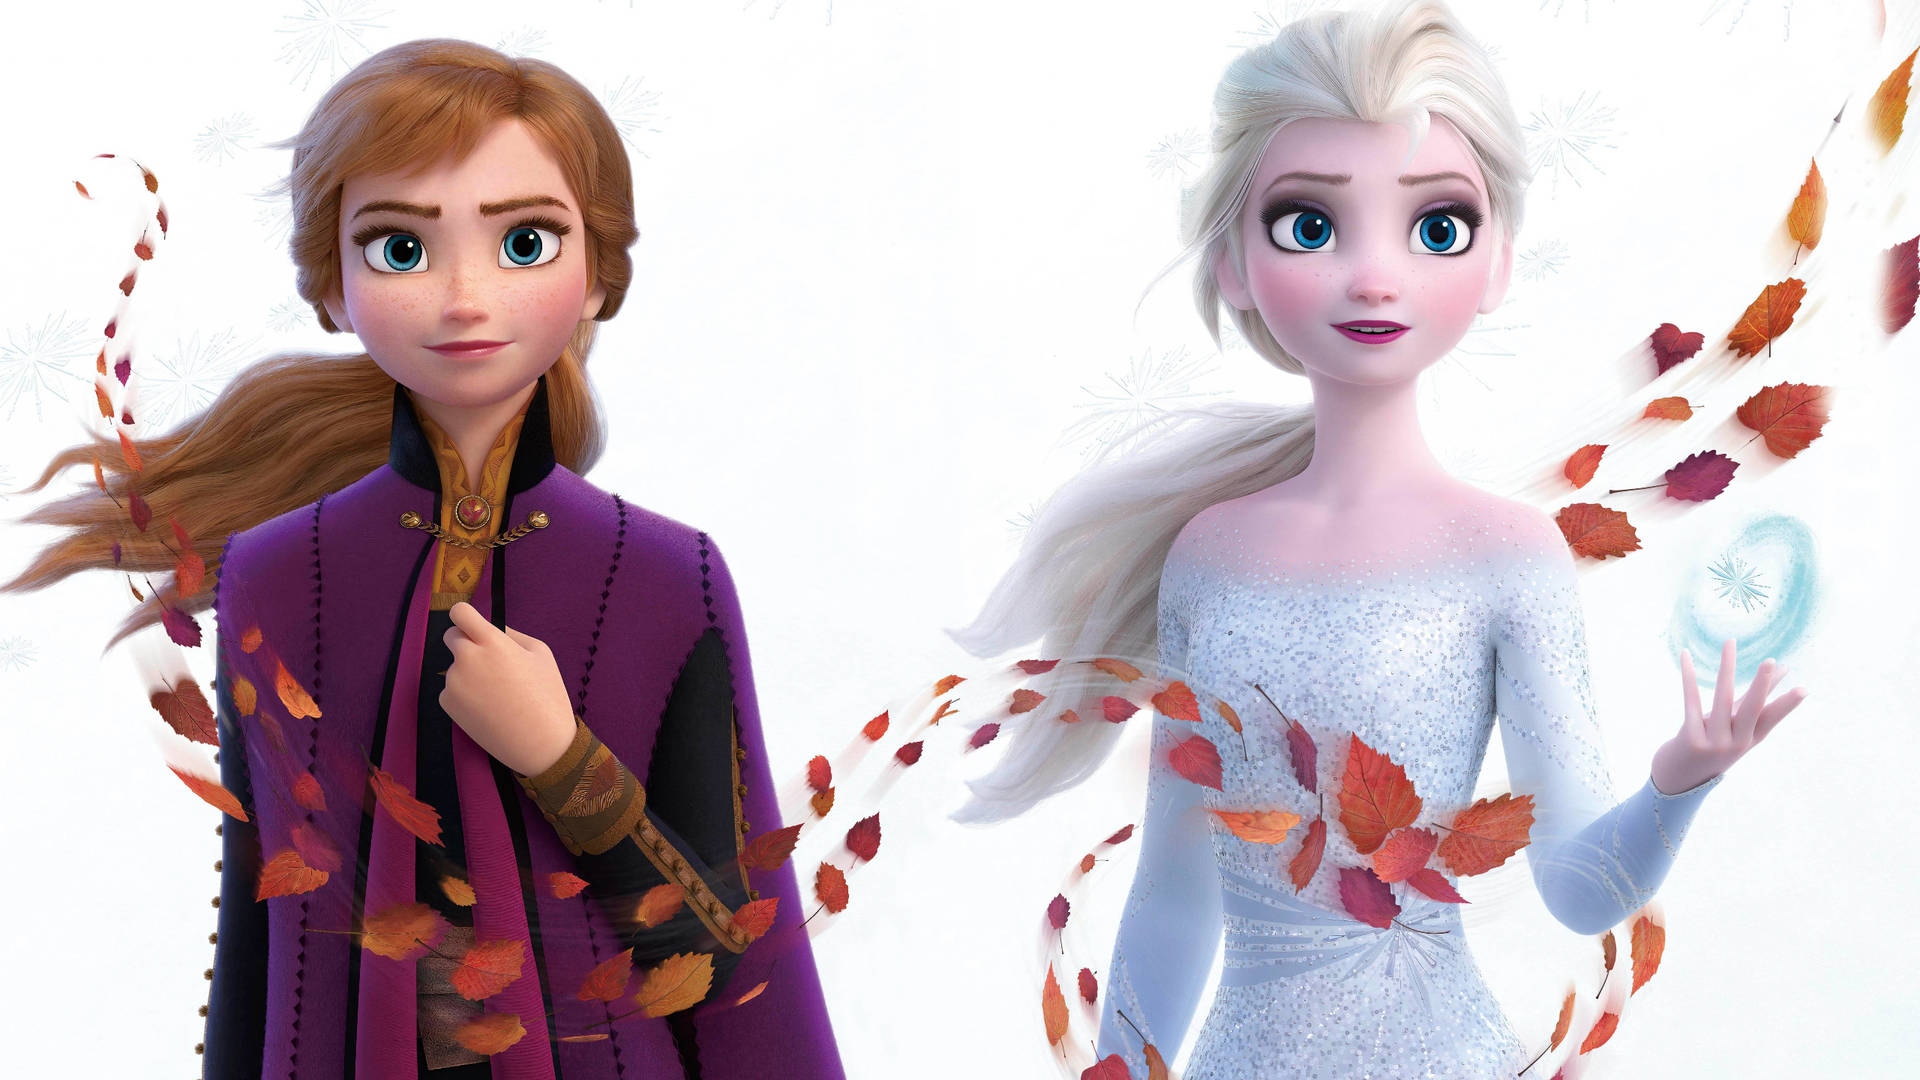 Sisters Tor The Heart: Elsa And Anna From The Movie Frozen Background